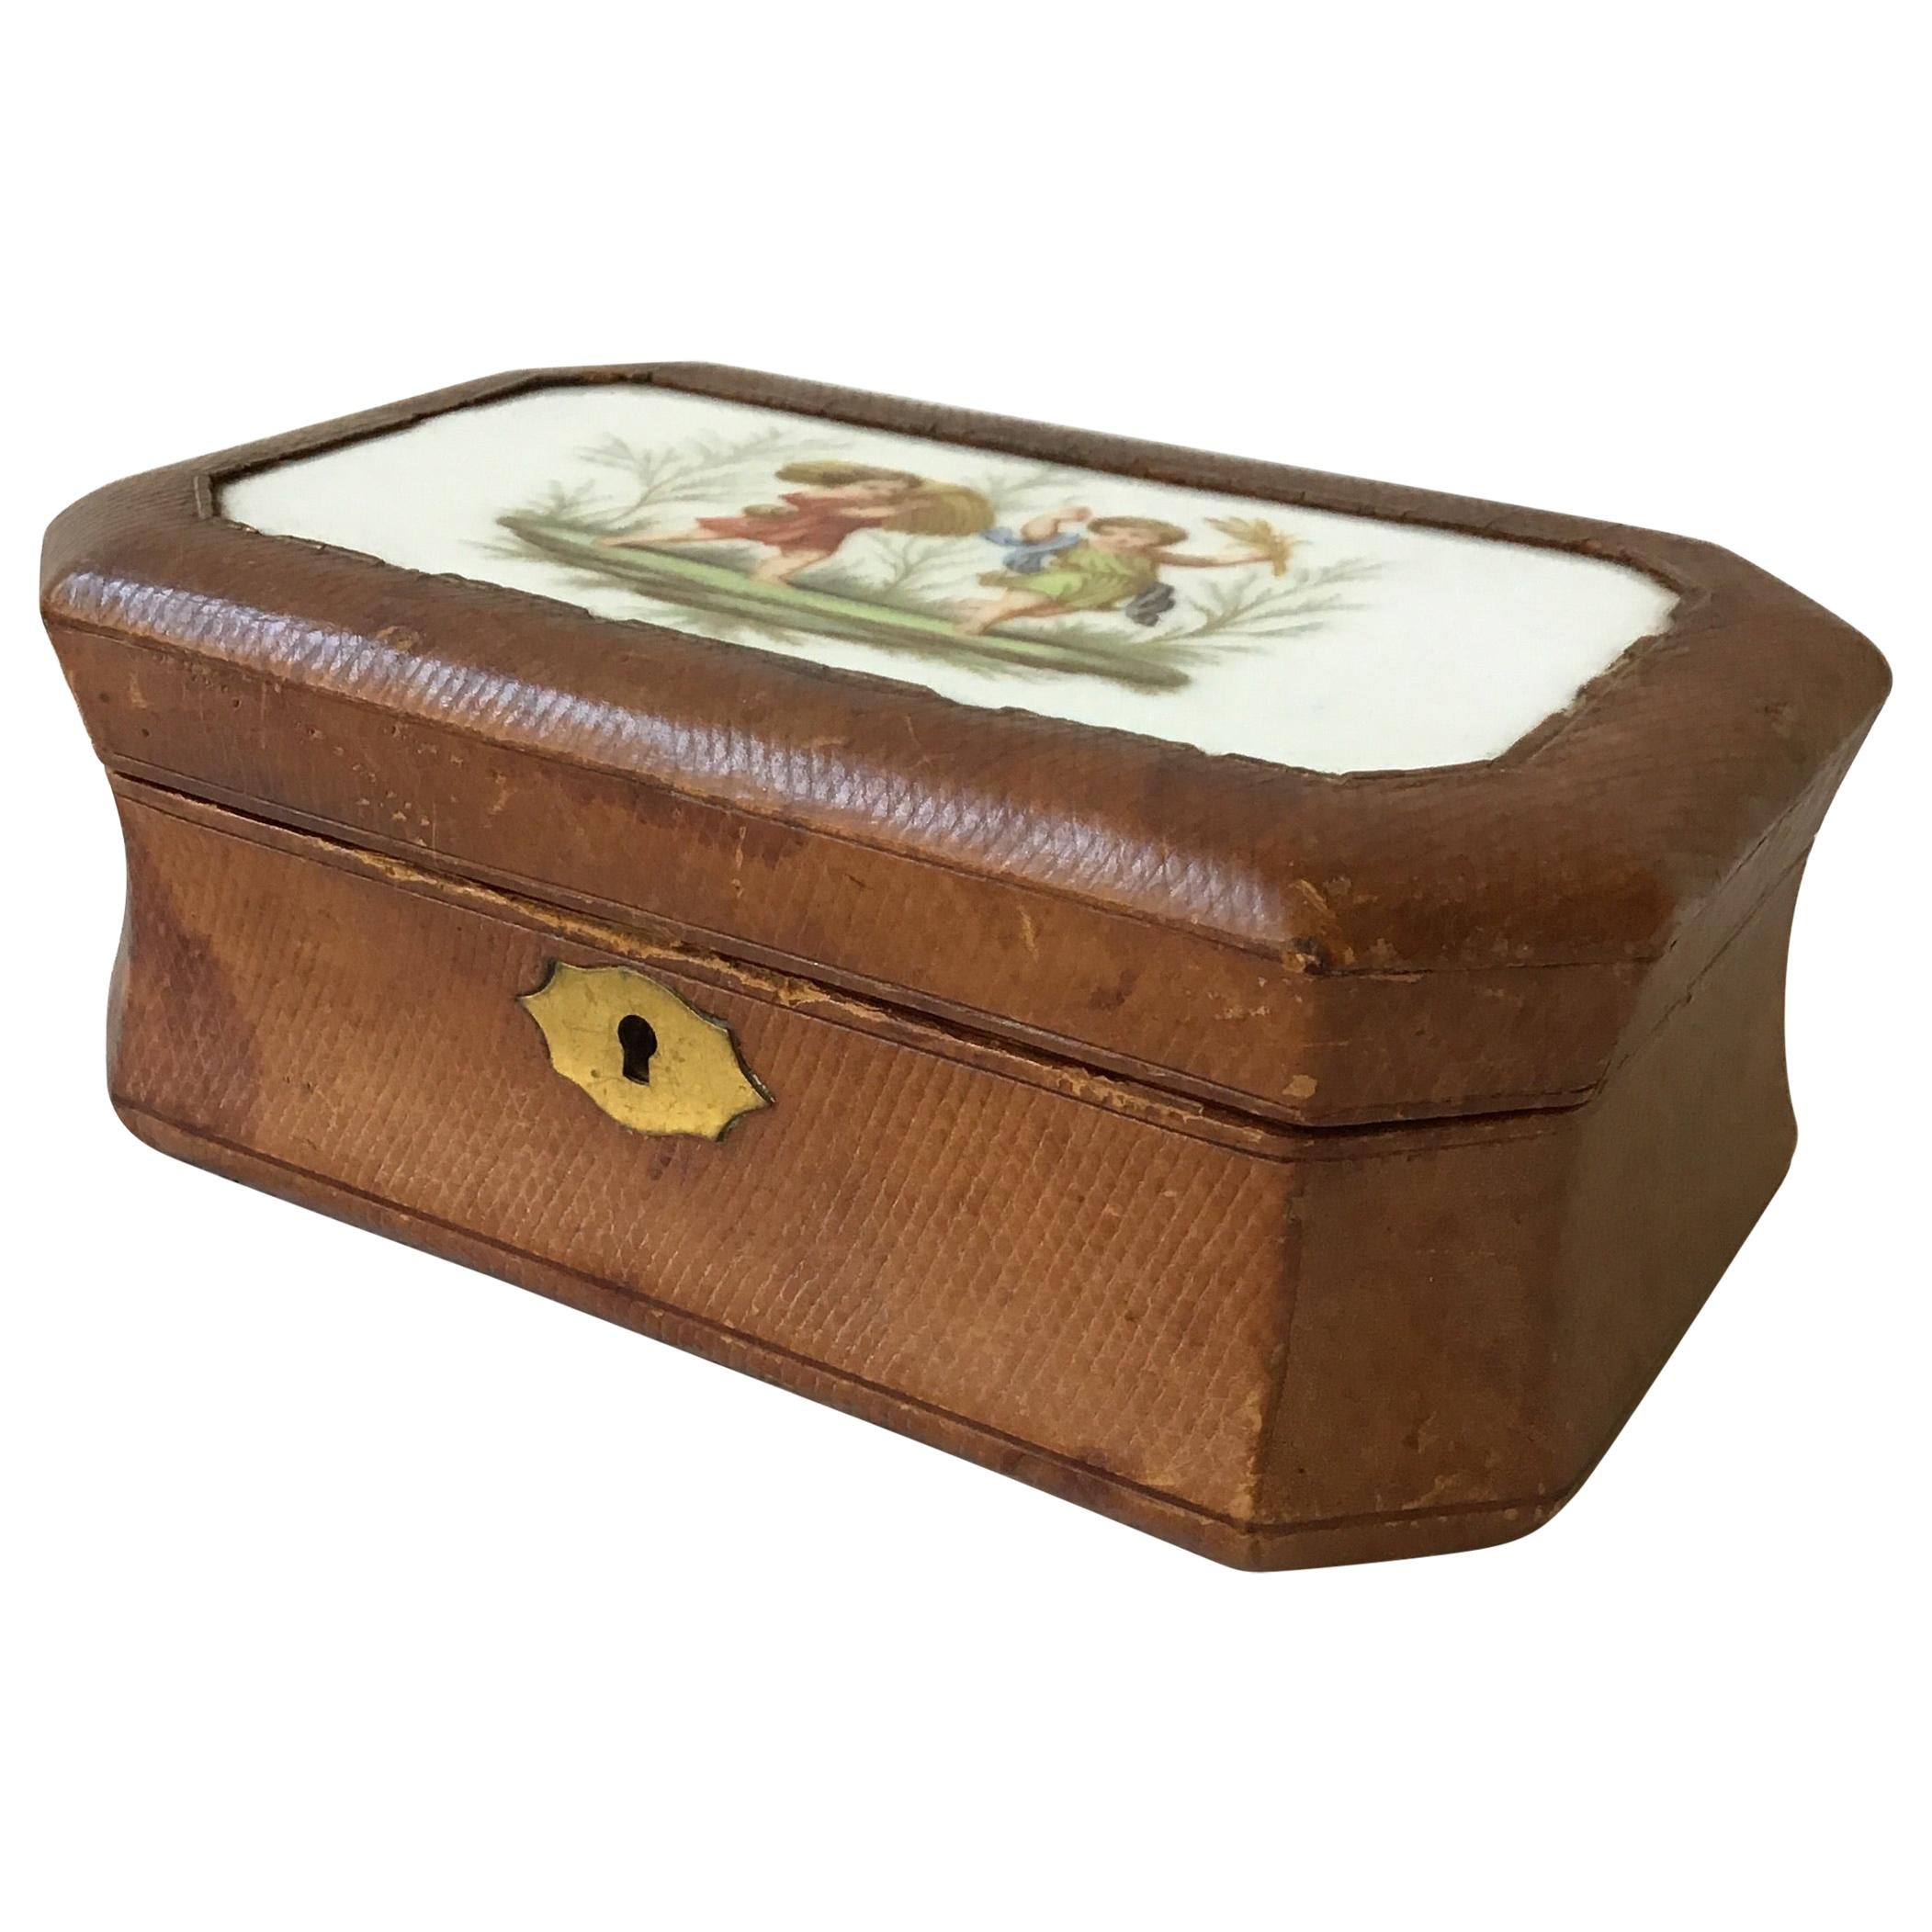 1890s French Leather Box with Ceramic Plaque of Children